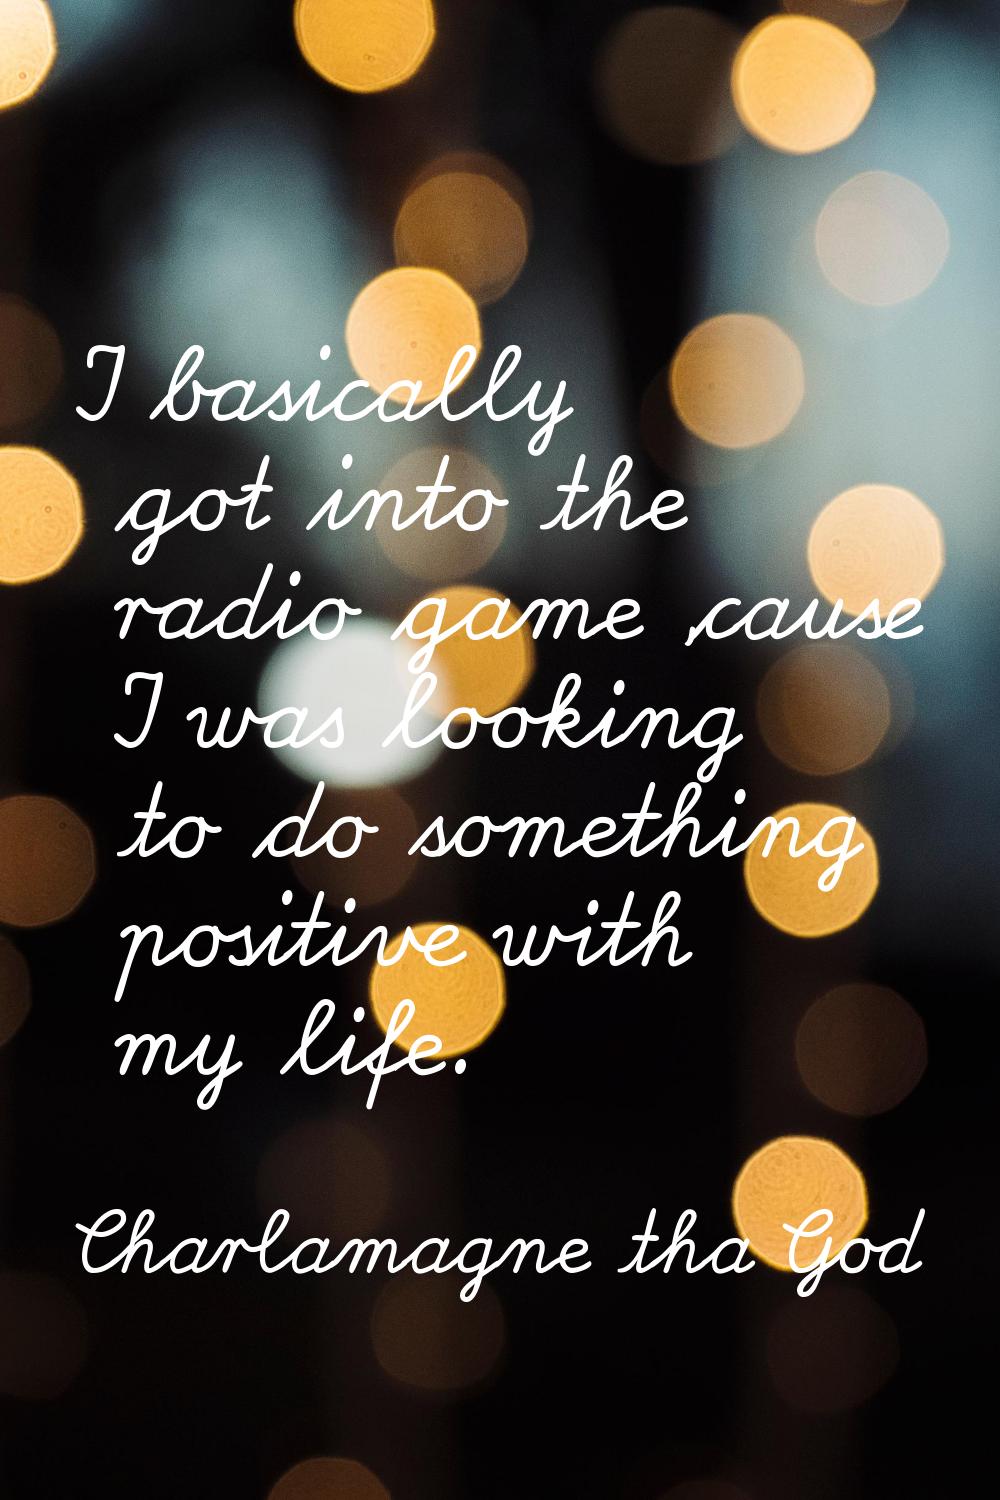 I basically got into the radio game 'cause I was looking to do something positive with my life.